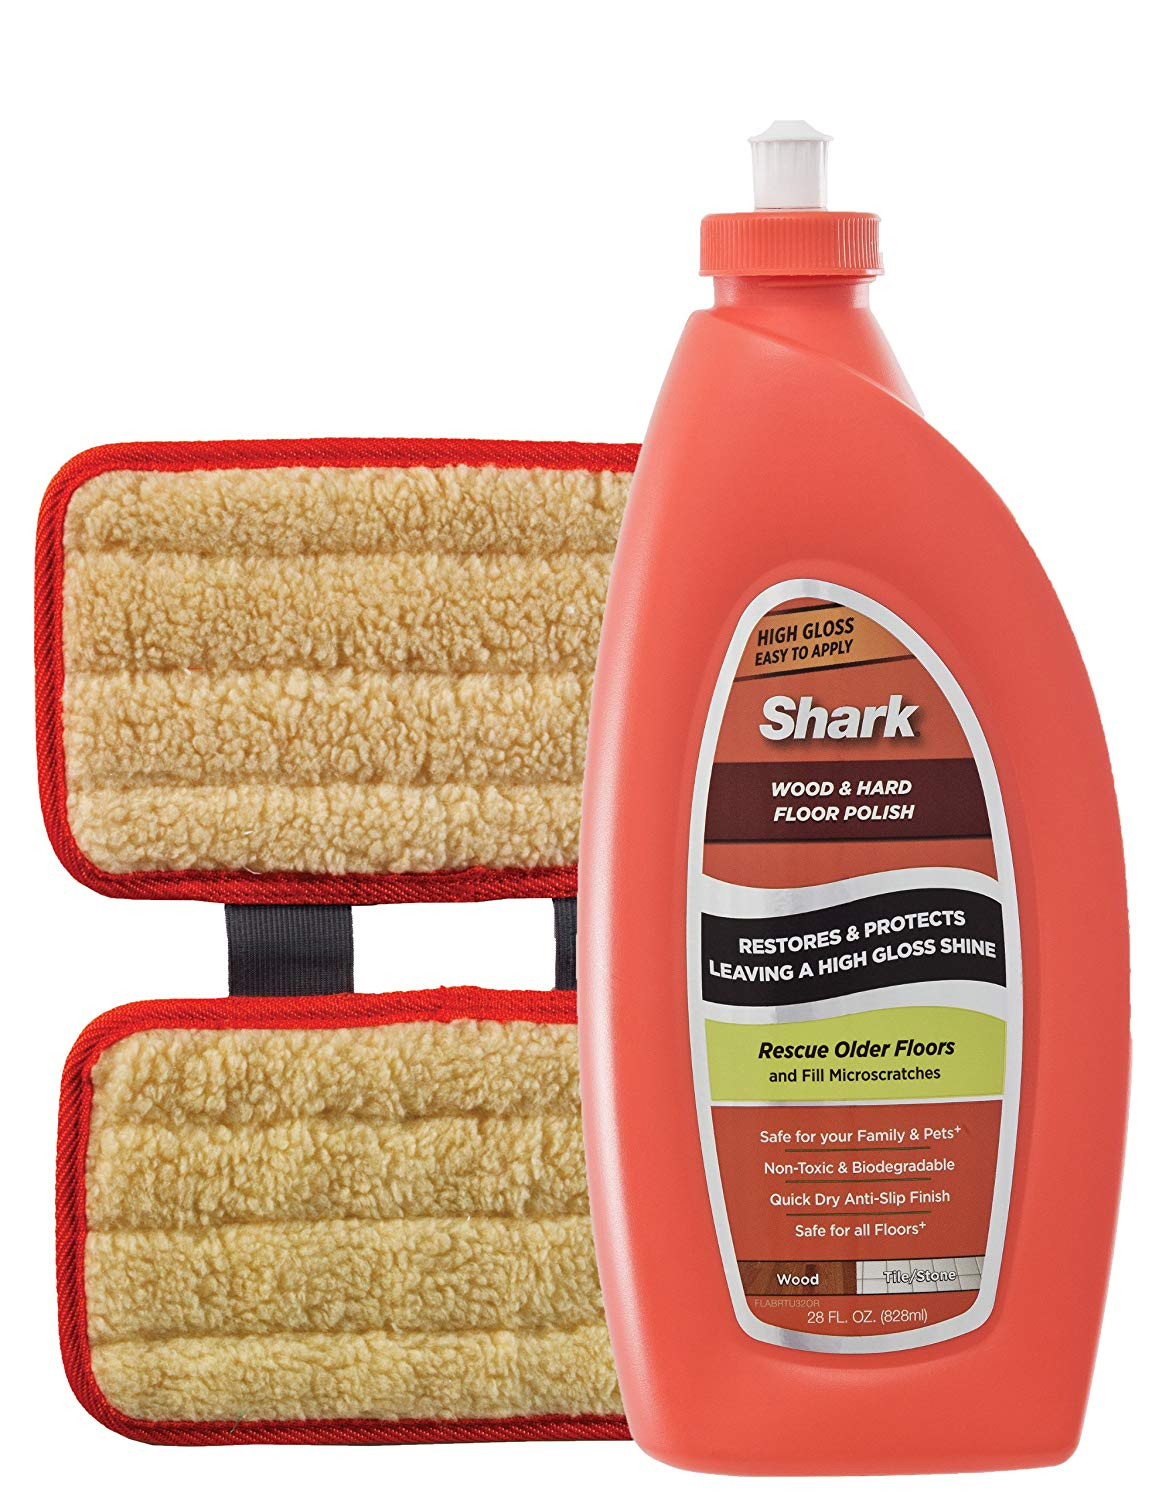 26 Fashionable Hardwood Floor Cleaner that Fills In Scratches 2024 free download hardwood floor cleaner that fills in scratches of amazon com shark high gloss polish floor cleaners in 91ef 6hngxl sl1500